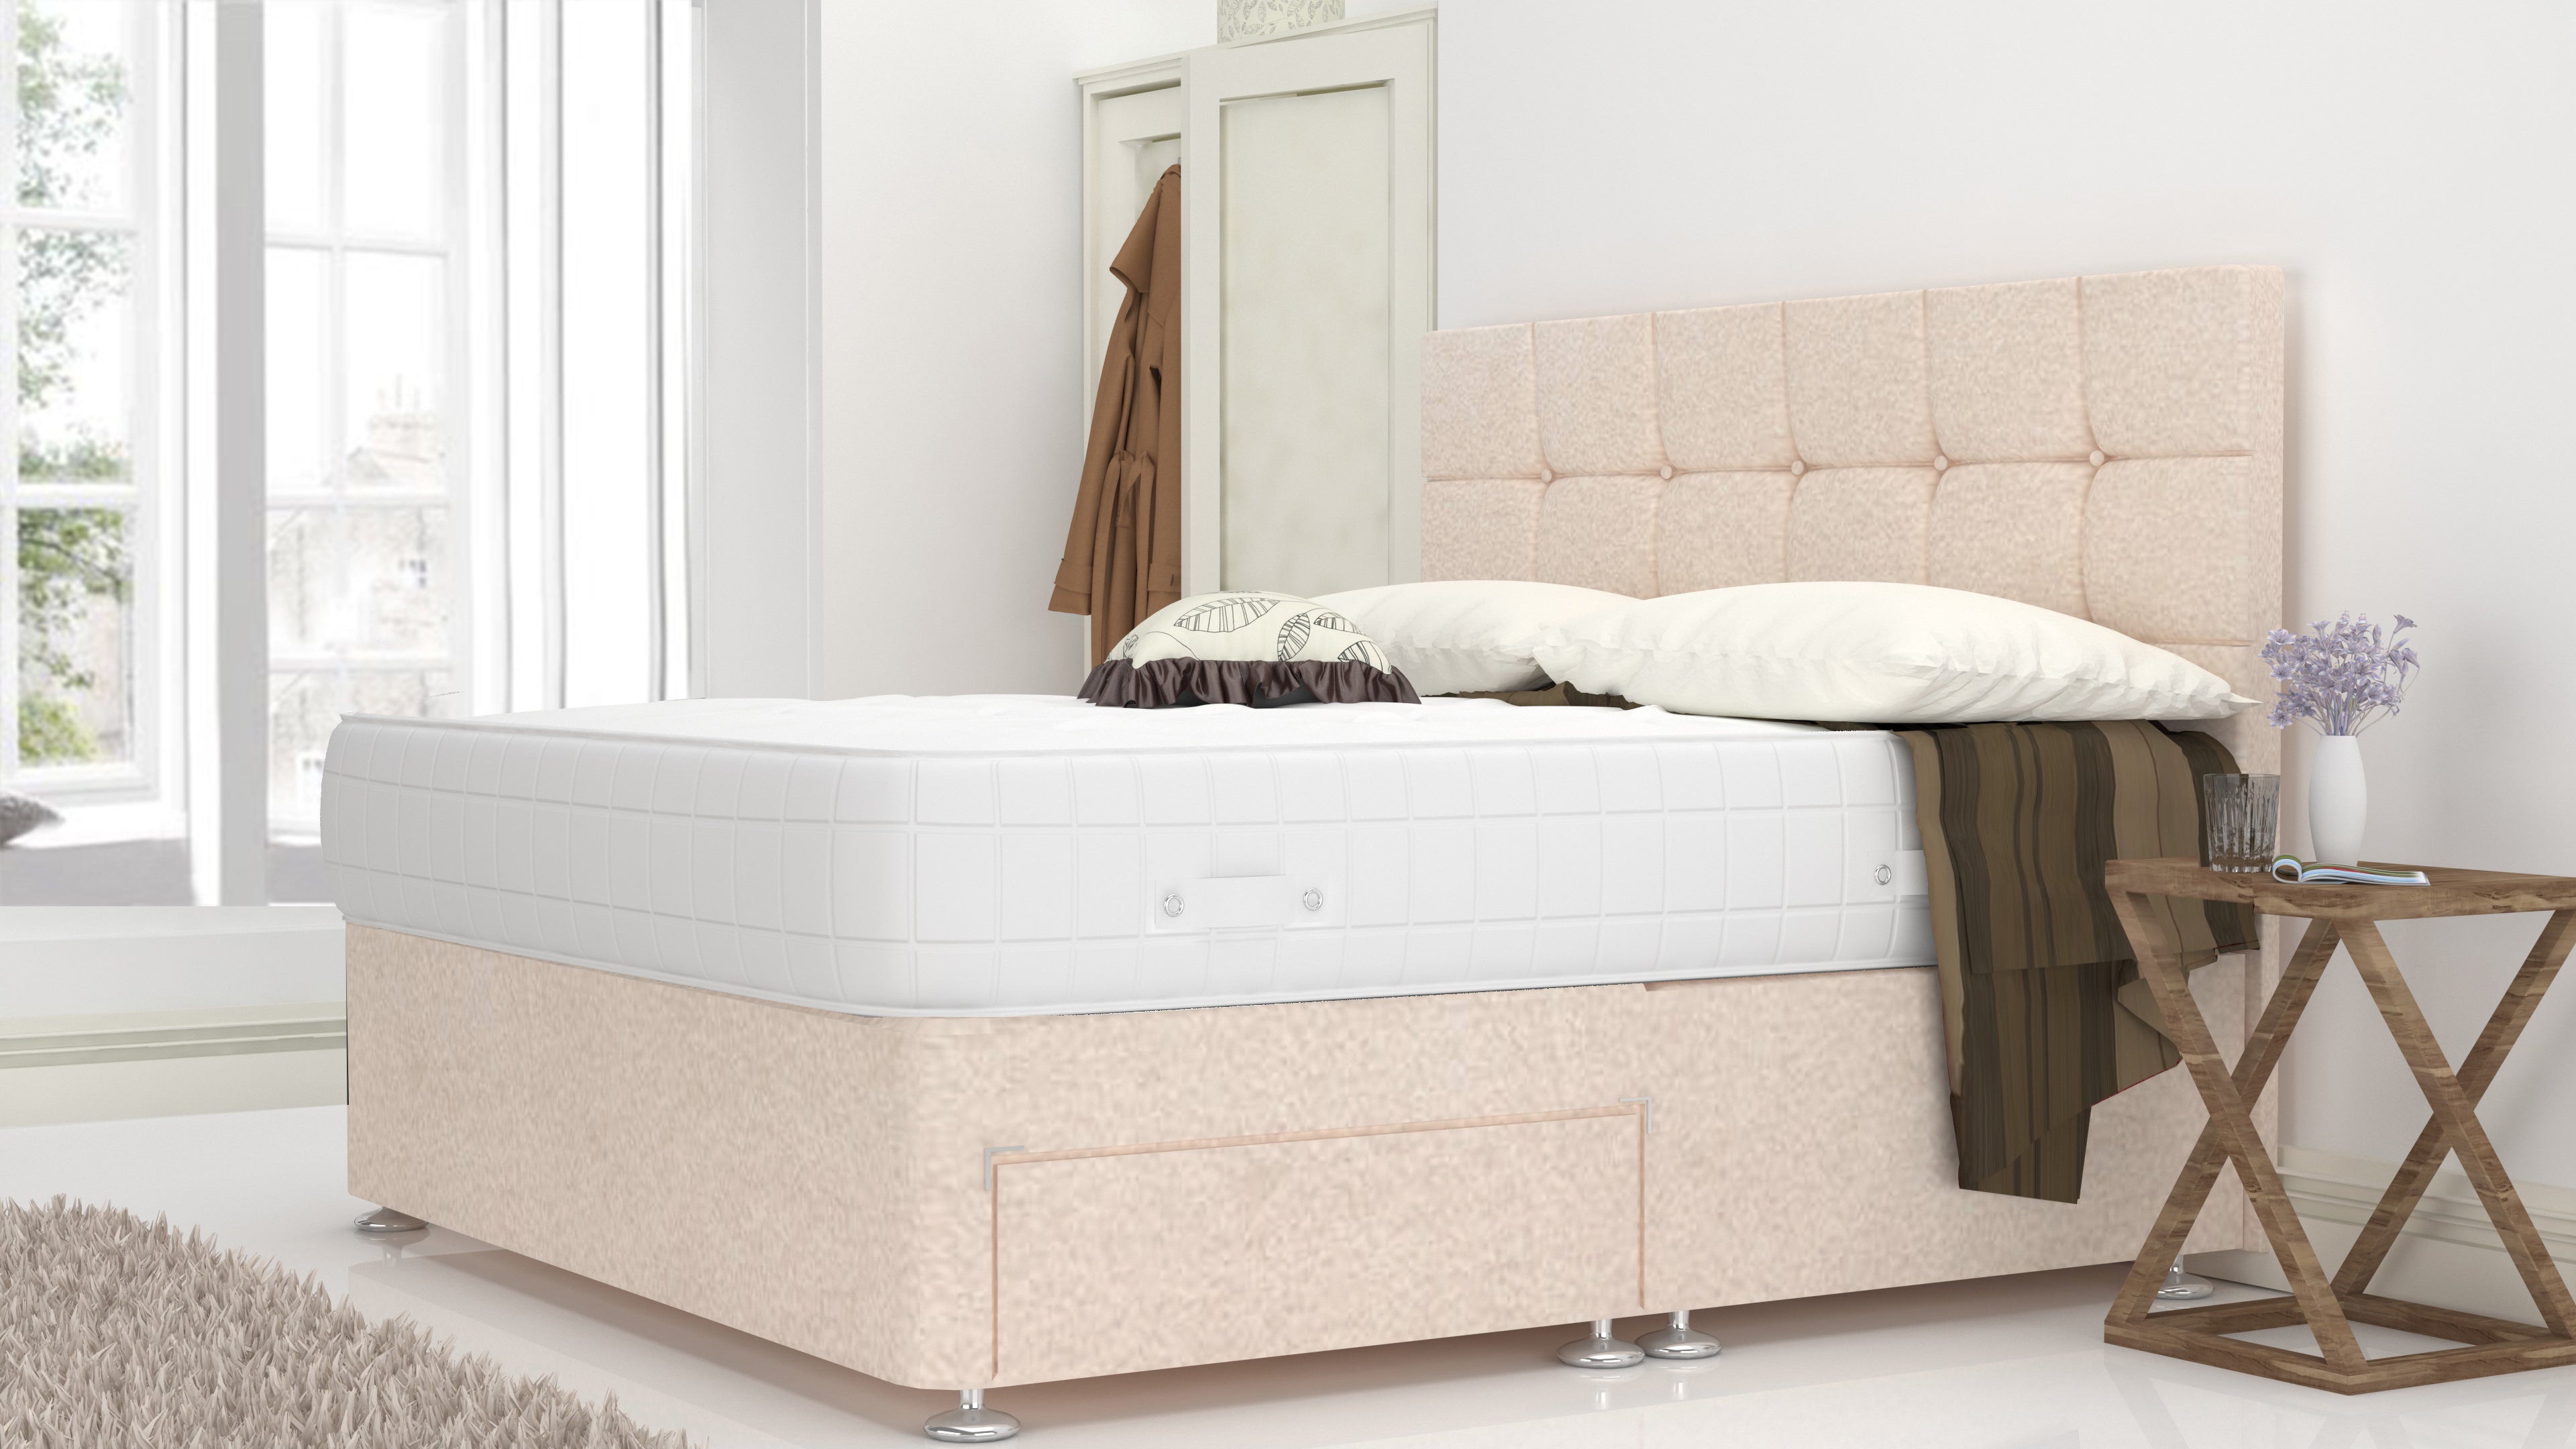 Cream Chanille 6 Feet Divan Bed Set With Cube Headboard (Included Feet) And Free Orthopedic Mattress